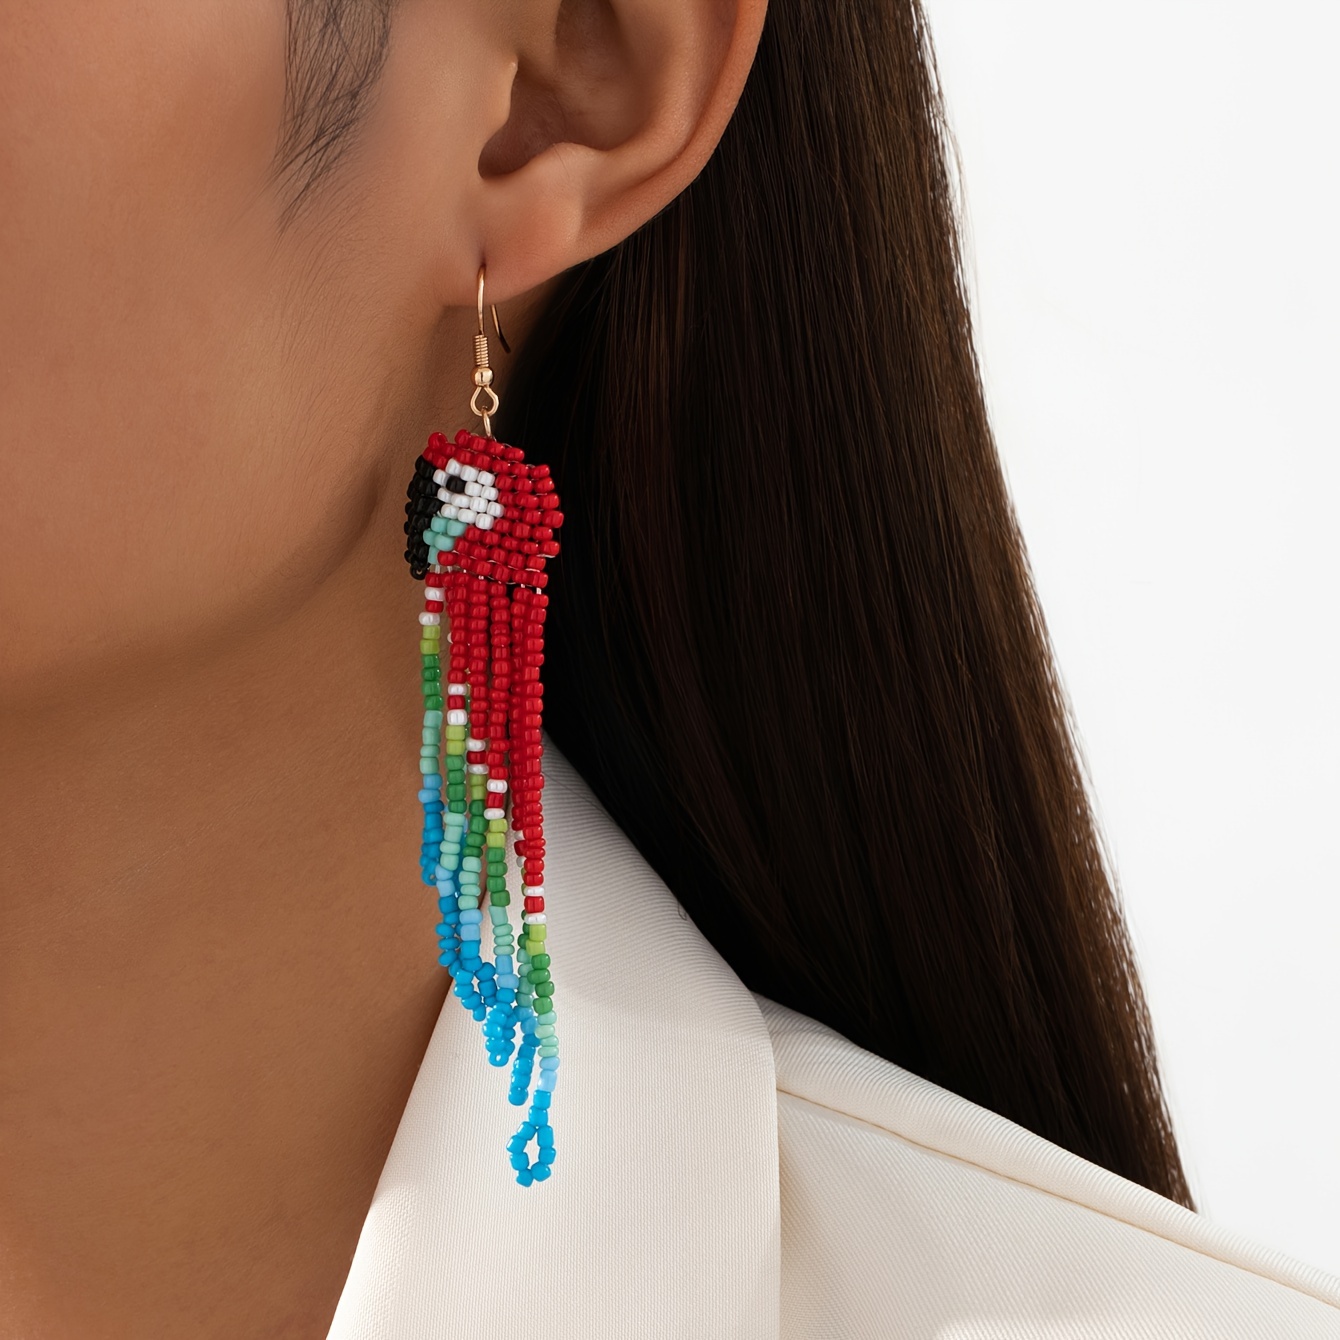 

Vintage Bohemian Animal-inspired Beaded Tassel Earrings - Handcrafted, Non-metallic, Suitable For Daily Wear And Holidays